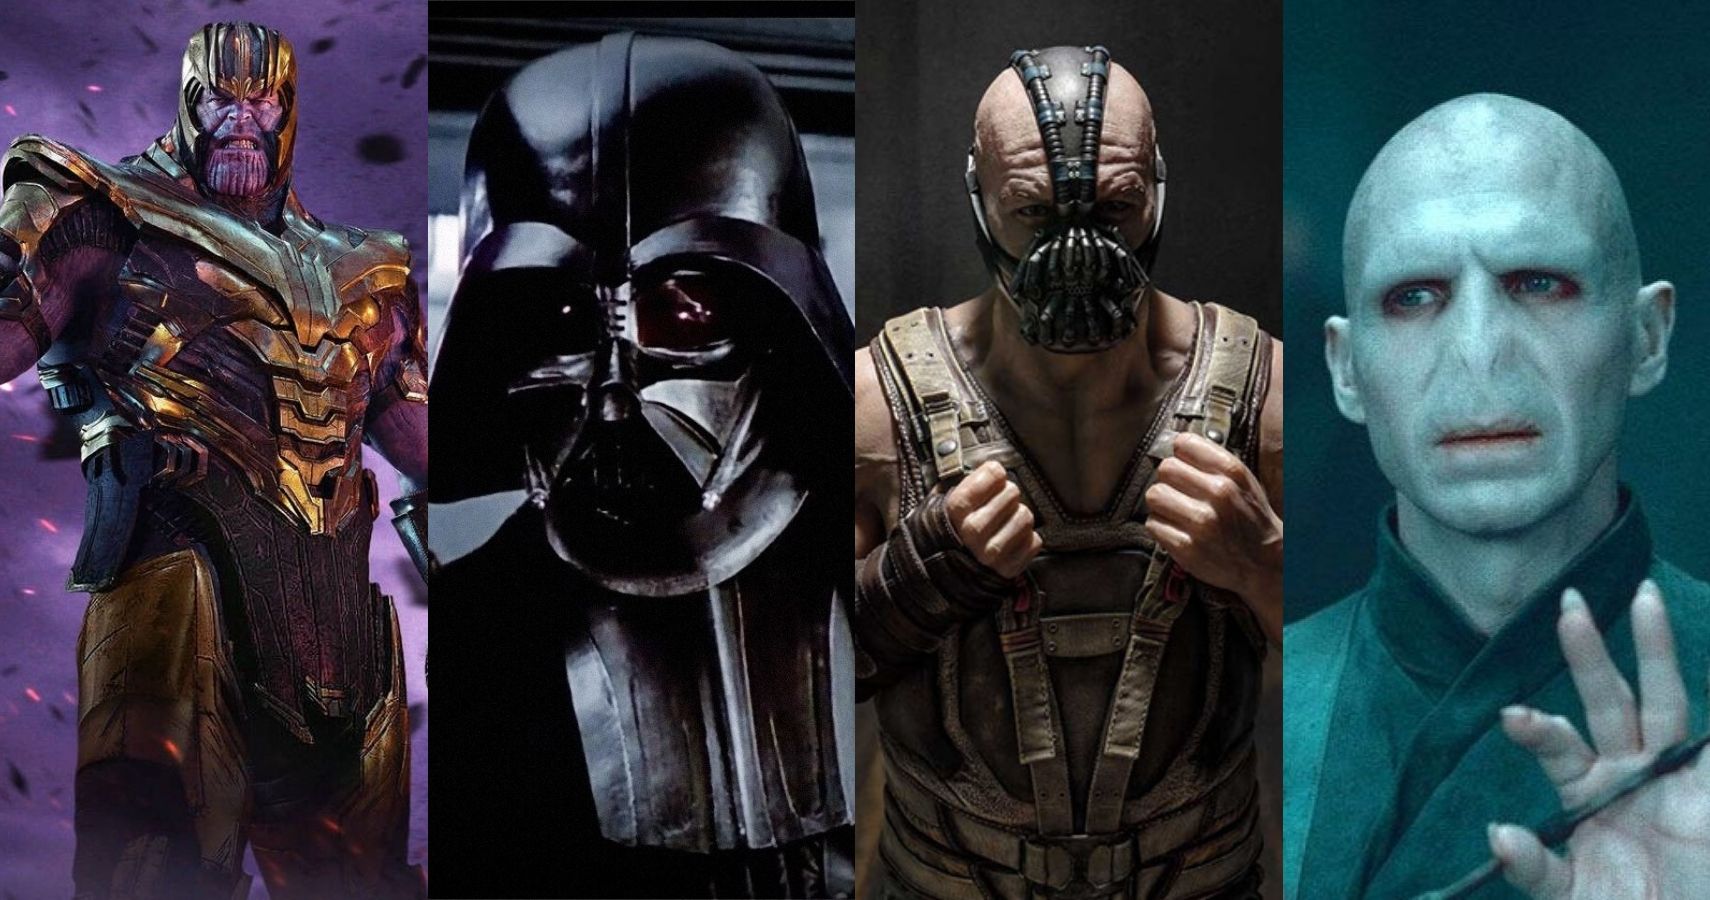 Movie's Most Notorious Villains: 5 That Had a Point (& 5 That Were Just